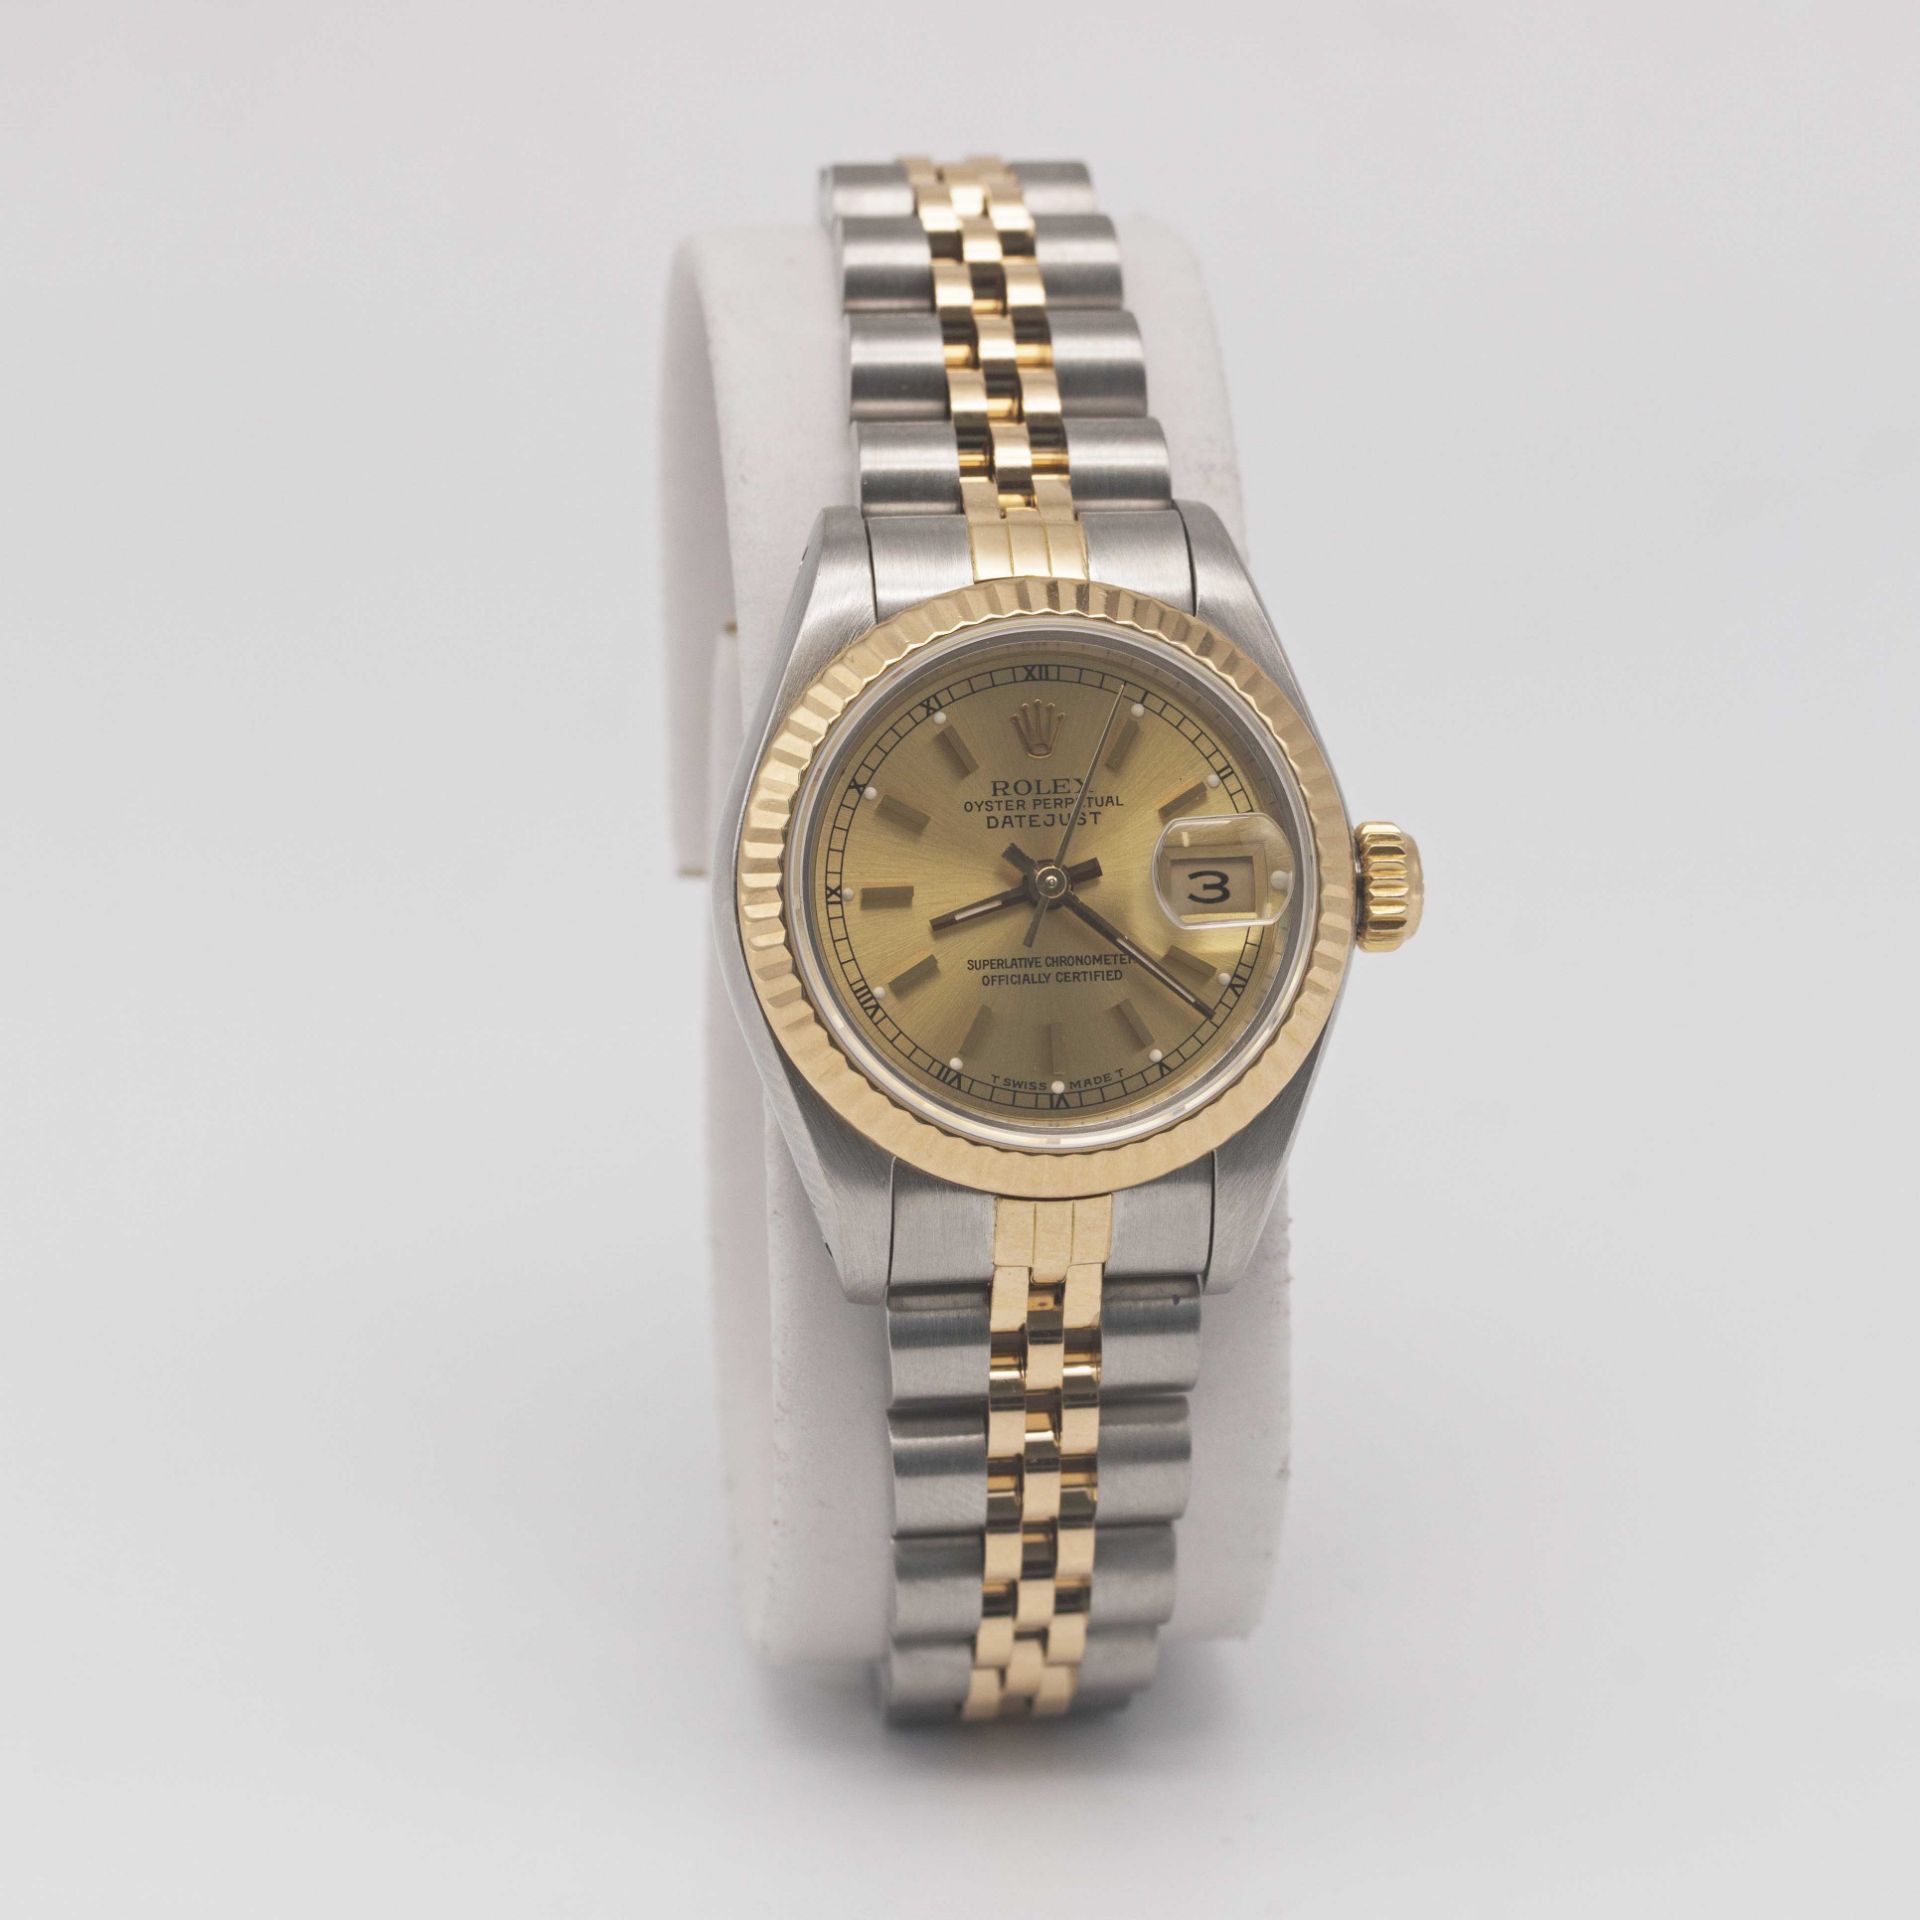 A LADIES STEEL & GOLD ROLEX OYSTER PERPETUAL DATEJUST BRACELET WATCH CIRCA 2000, REF. 69173 WITH - Image 4 of 12